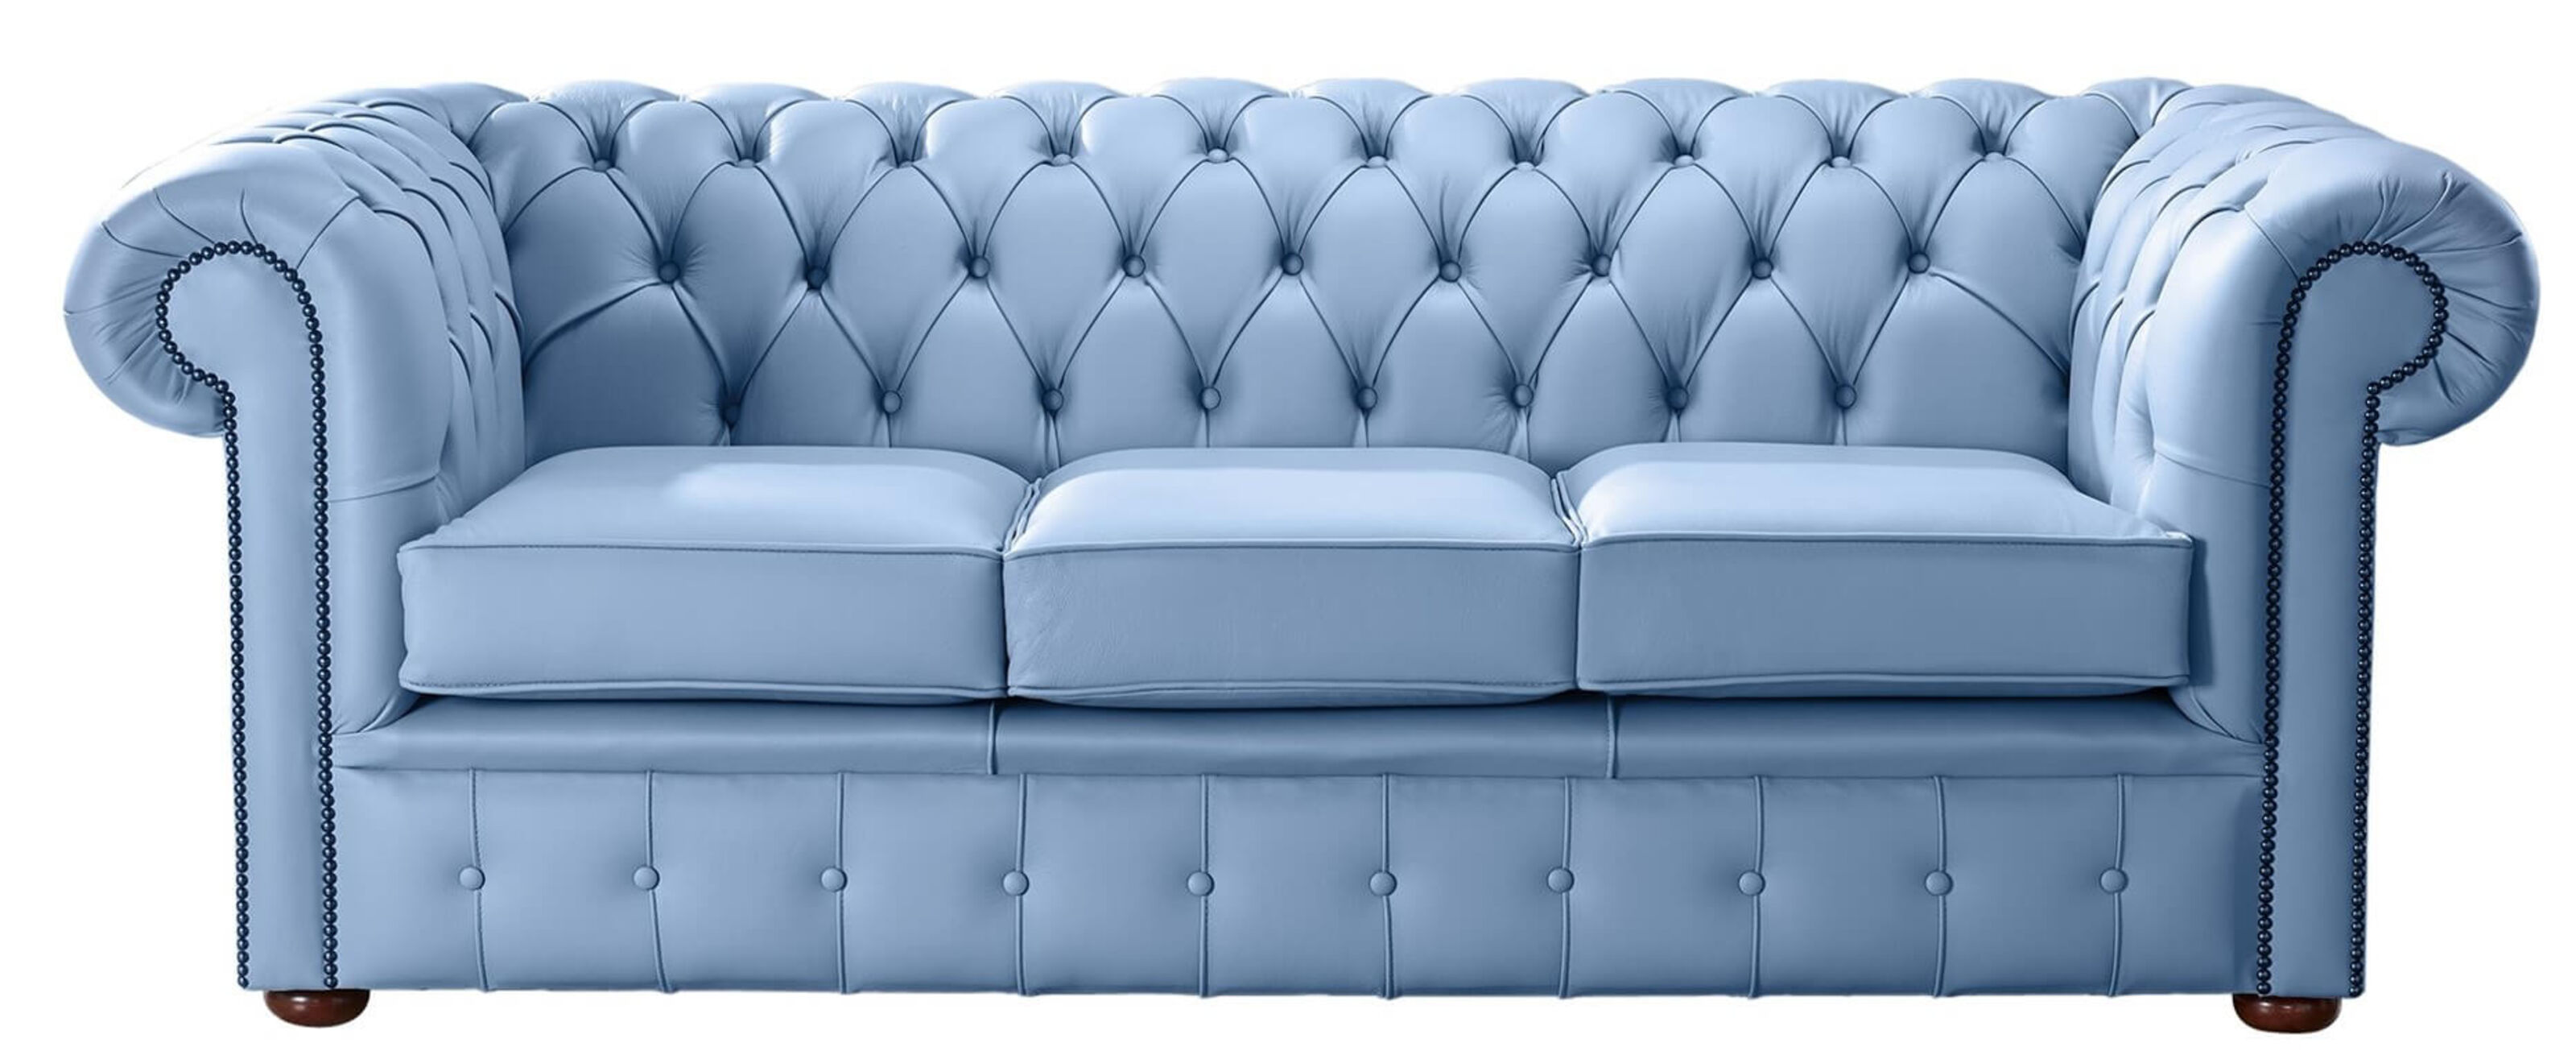 Elevating Your Space Incorporating a Chesterfield Sofa into Your Living Room Design  %Post Title